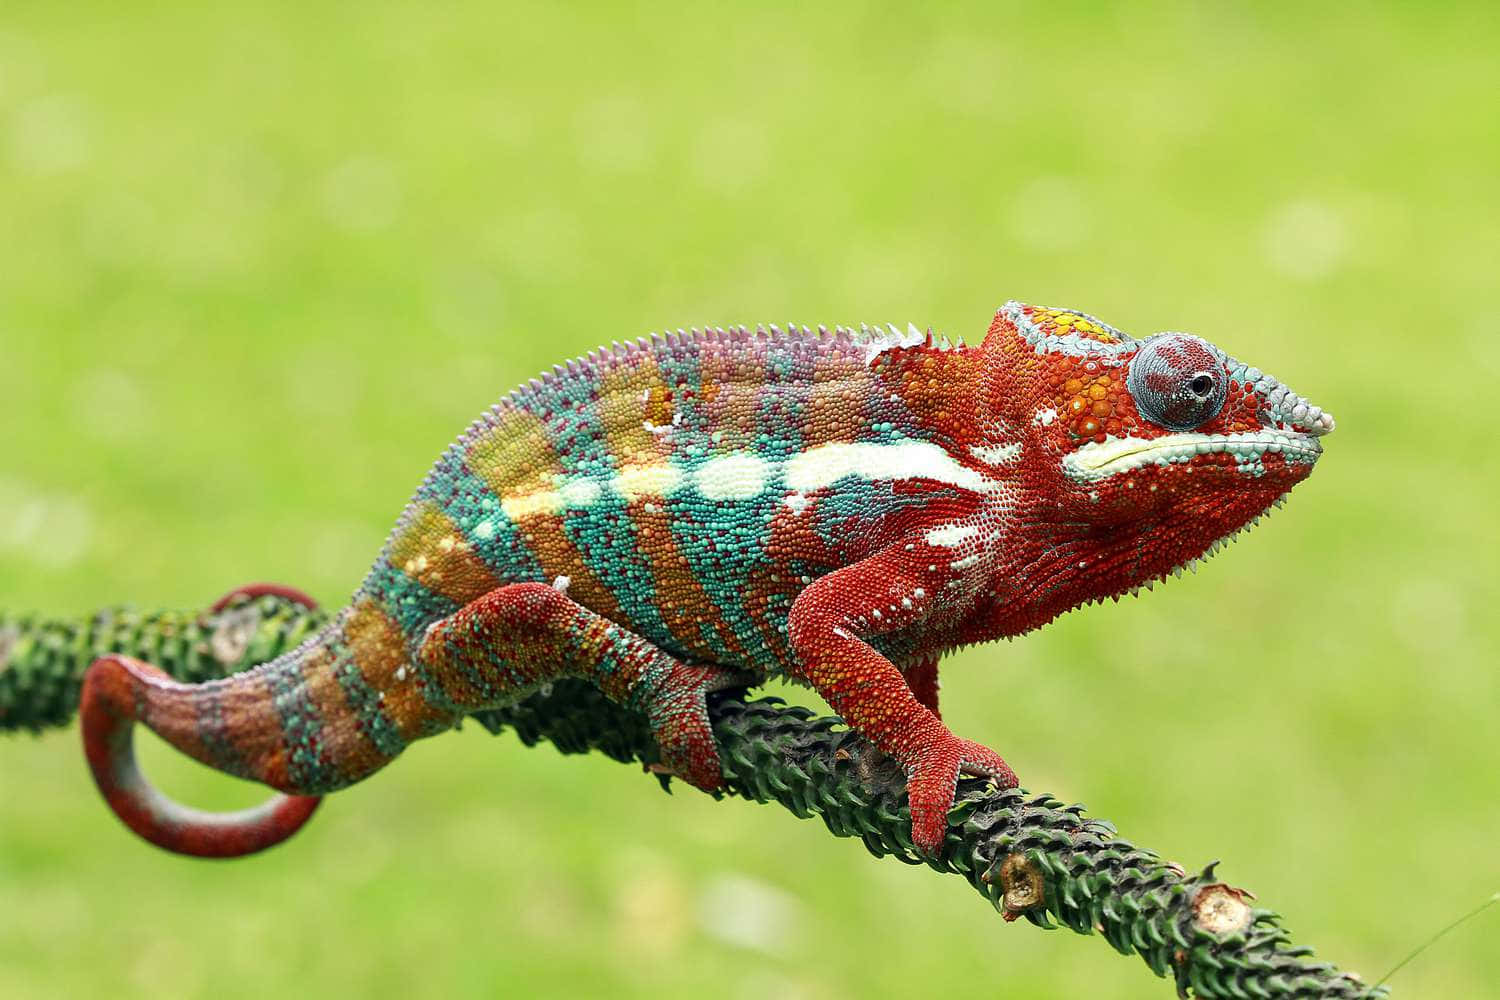 A Colorful Chameleon Is Sitting On A Branch